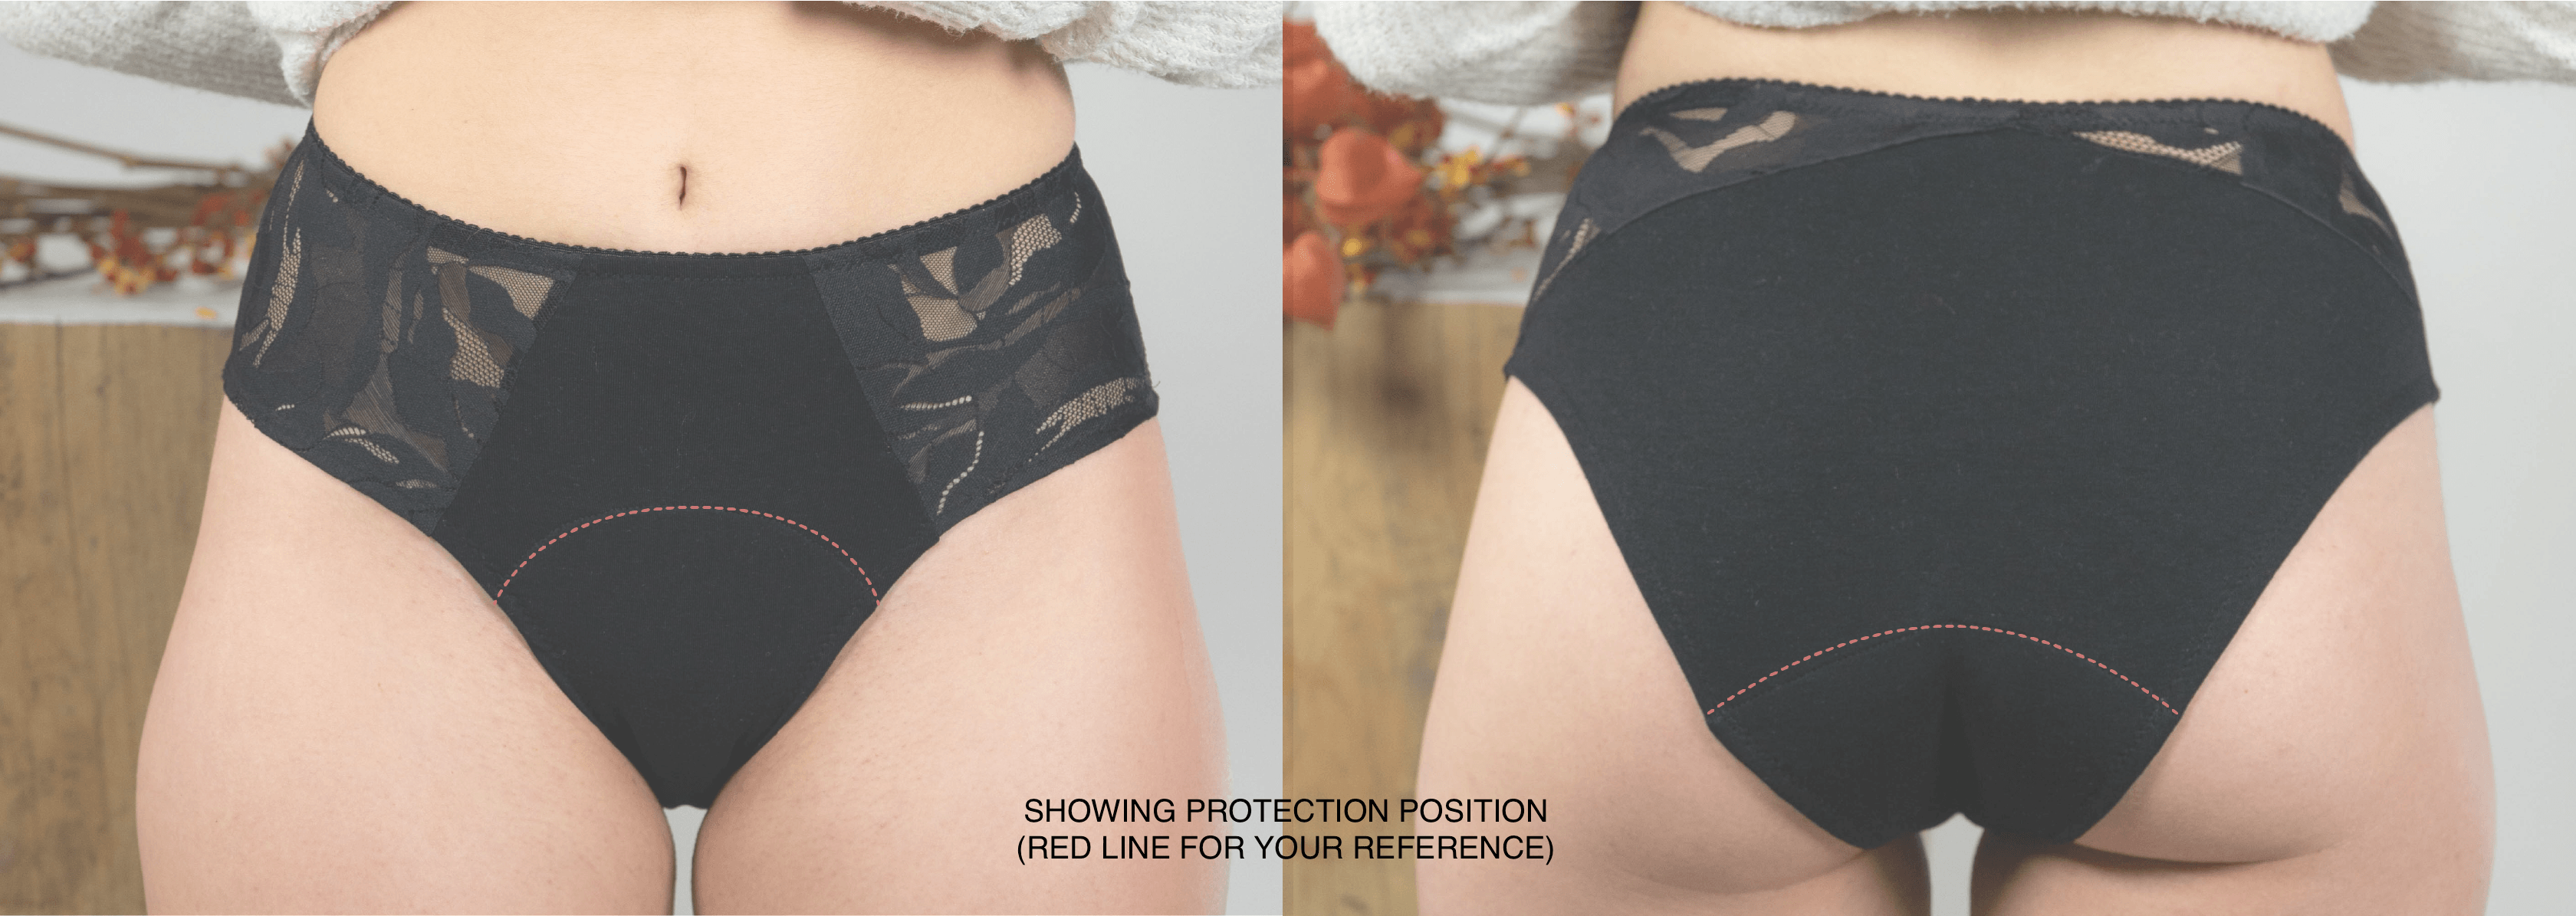 2pcs Super Soft Non-Woven Period Underwear: Skin-Friendly Panty Shaped  Sanitary Napkins for Night Safety